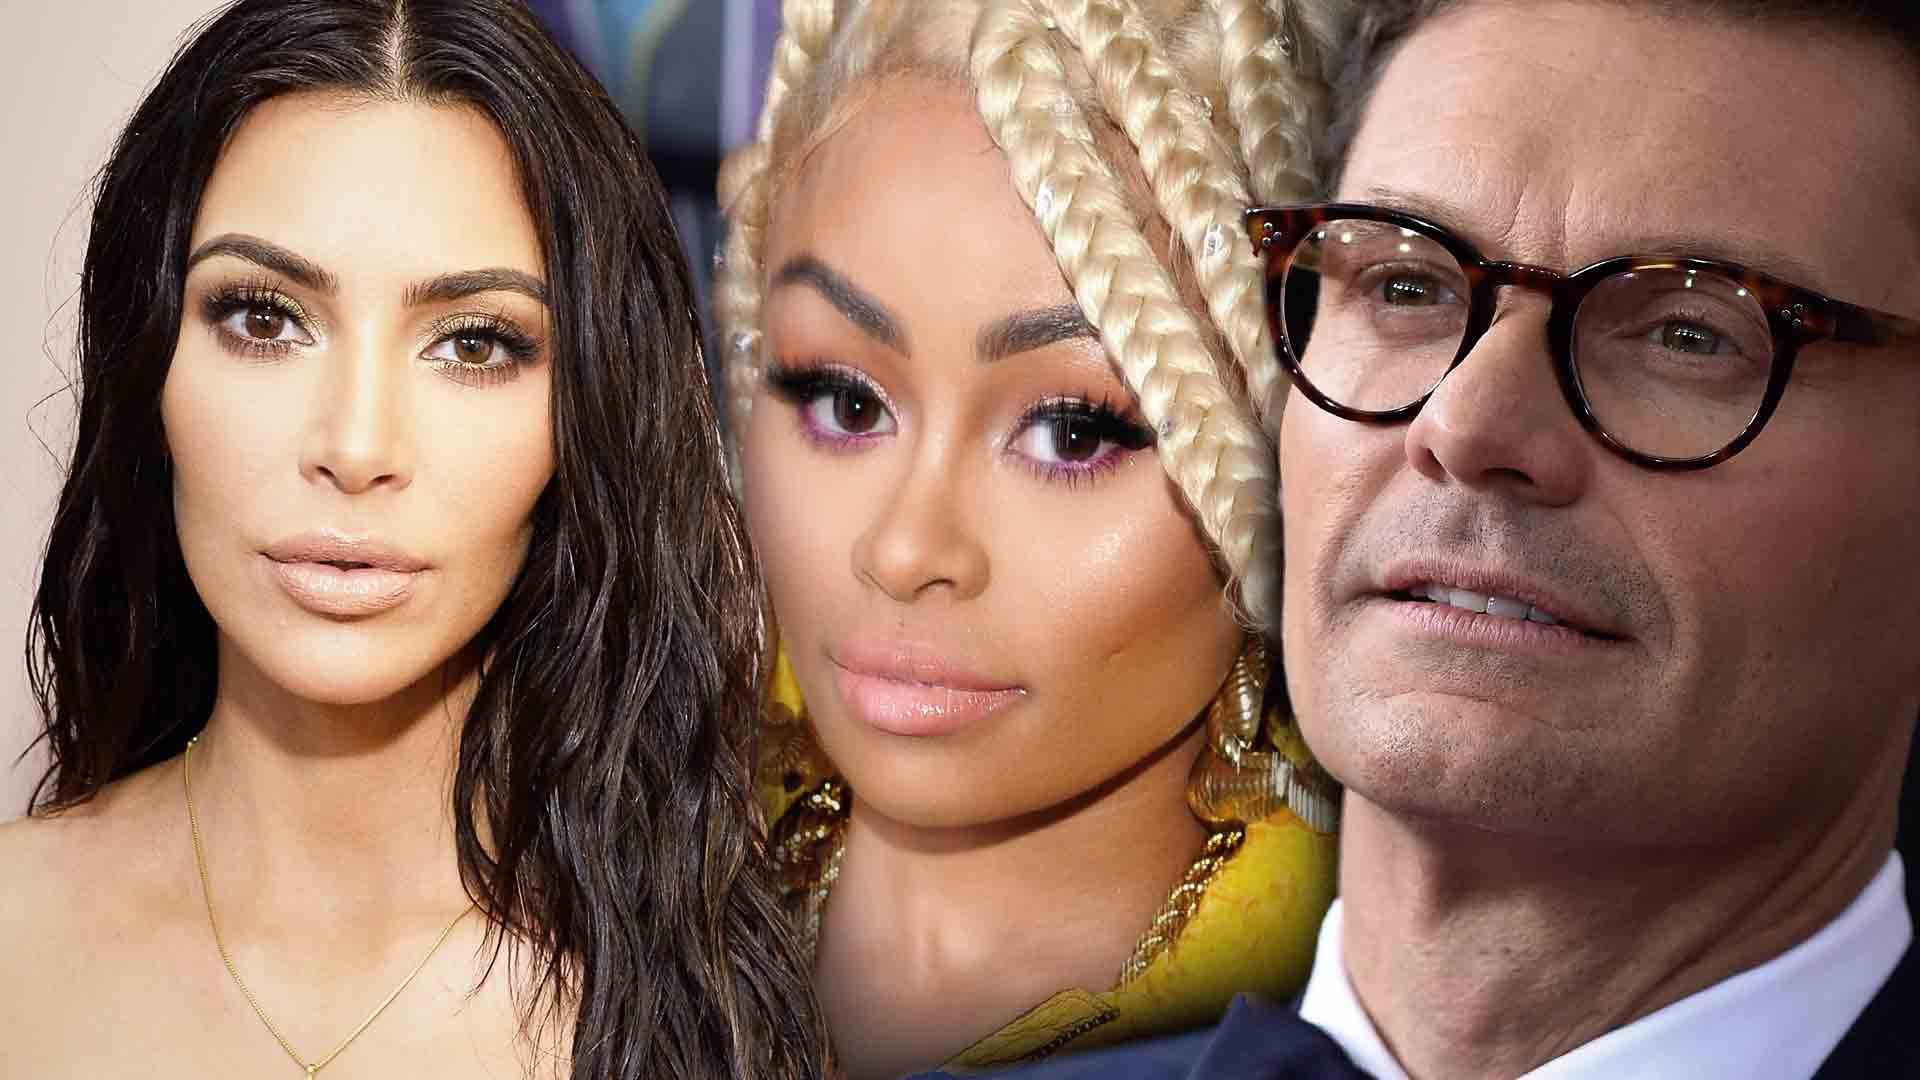 Blac Chyna Wants to Get Her Hands on Ryan Seacrest’s Emails With Kim Kardashian and Kylie Jenner